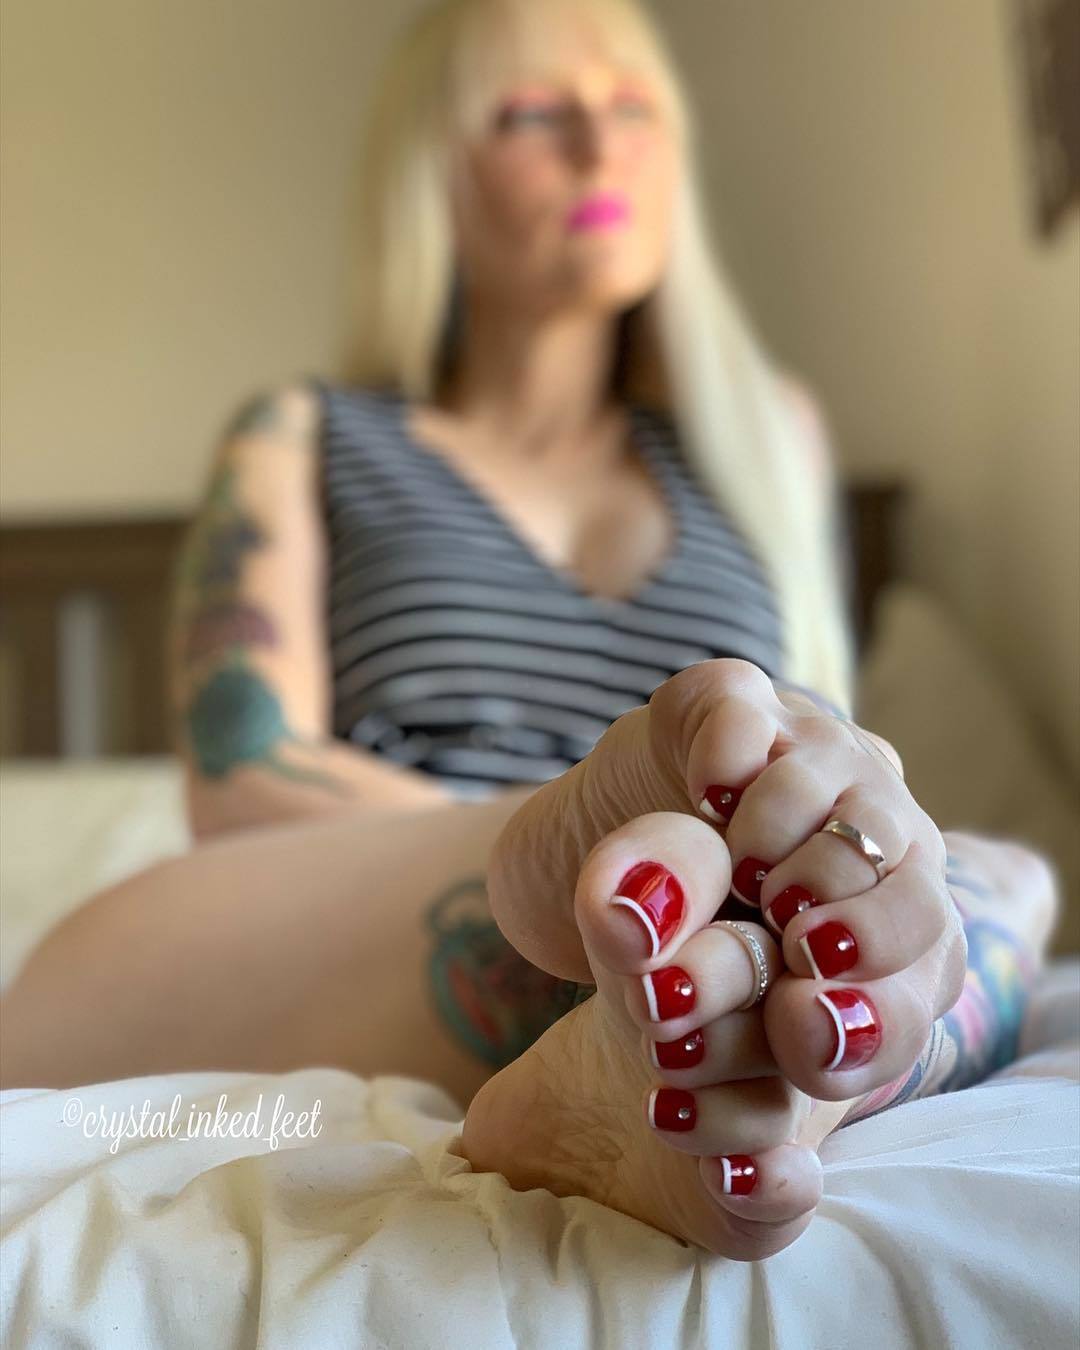 Crystal inked feet onlyfans